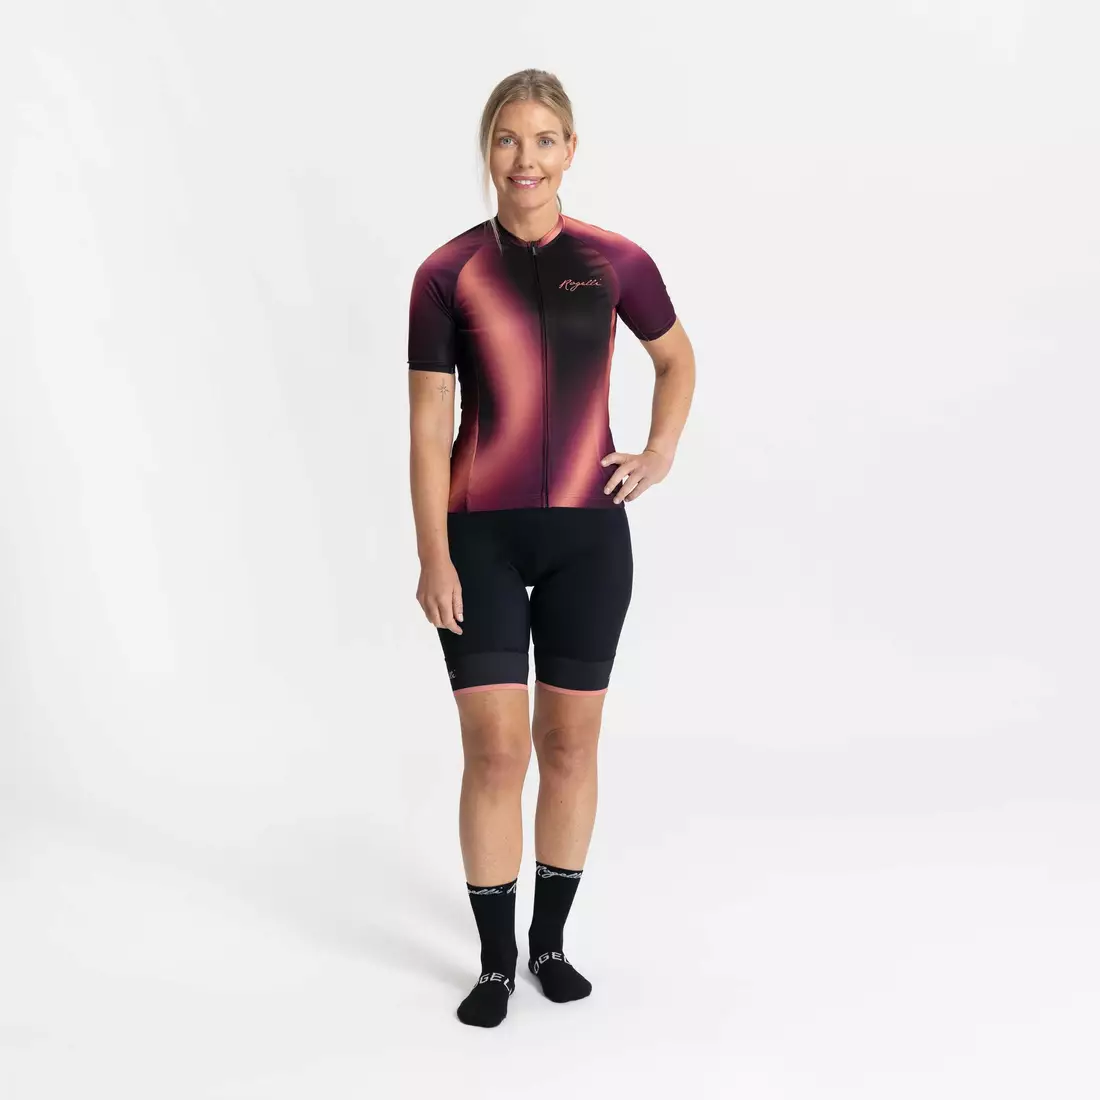 Rogelli women's cycling jersey AURORA burgundy and coral